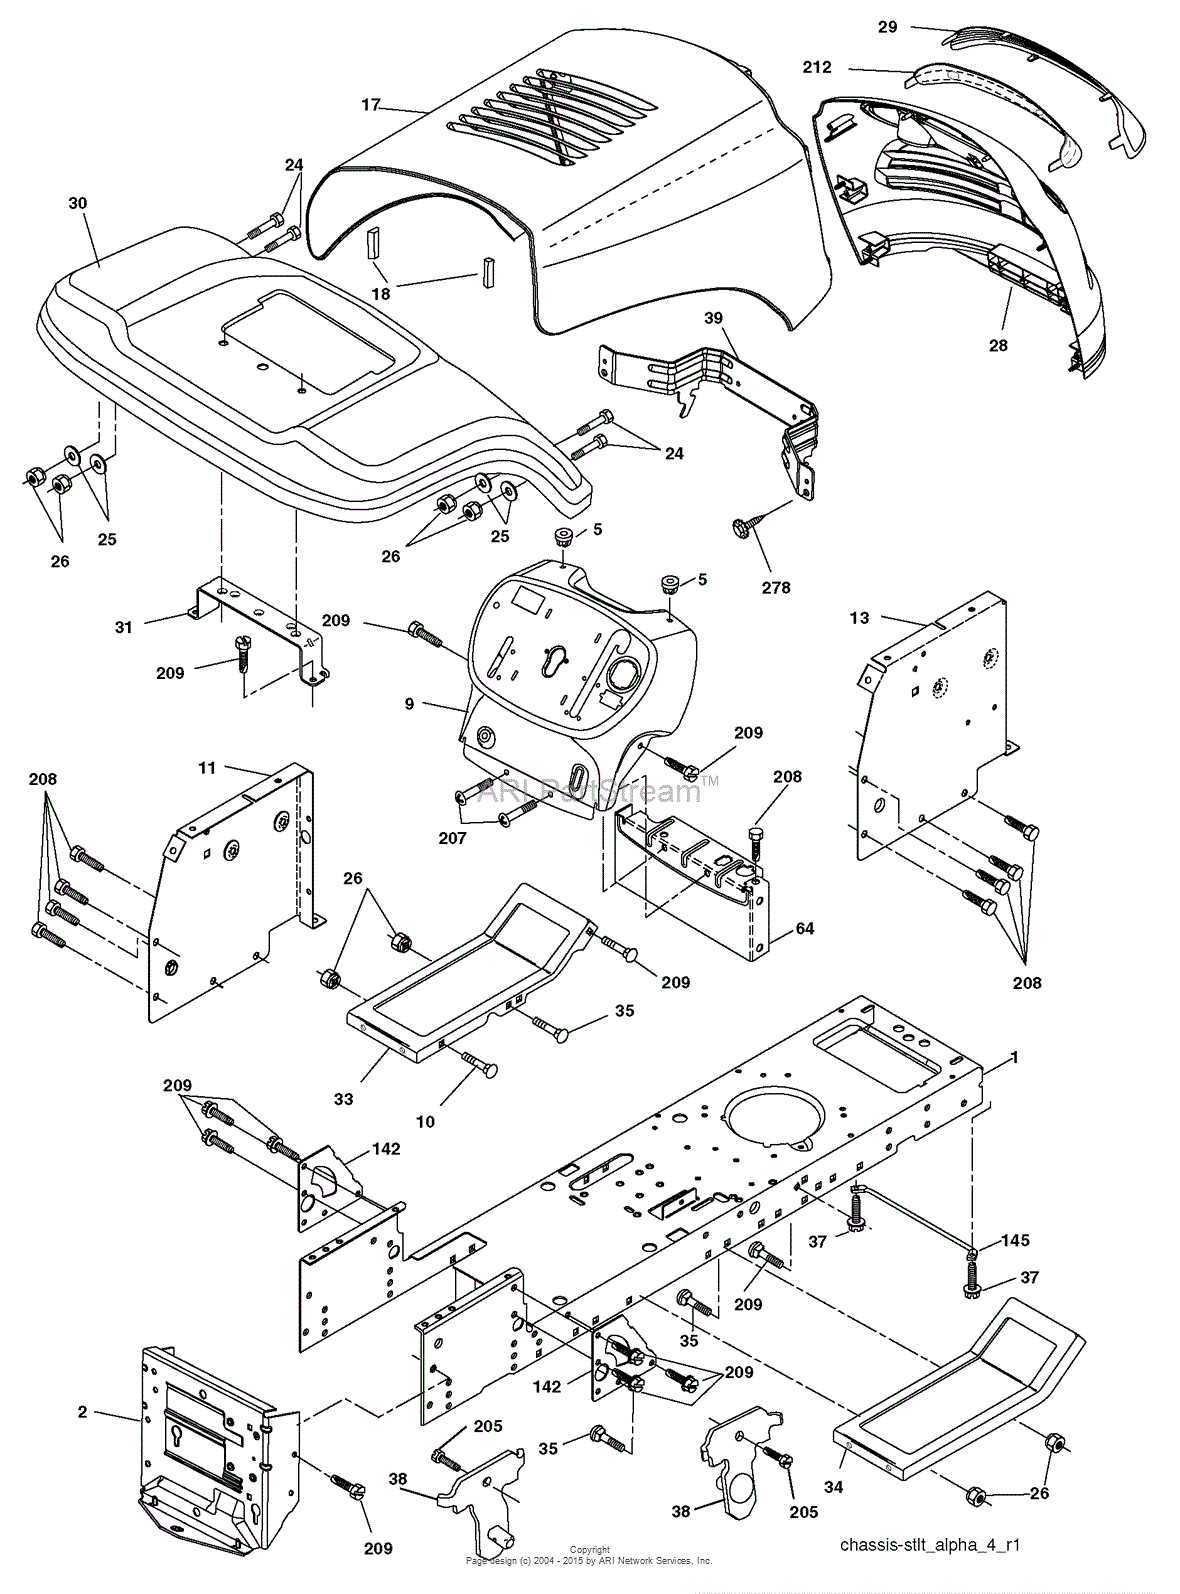 AYP/Electrolux PO18542LT (2008-10) Parts Diagram for Chassis